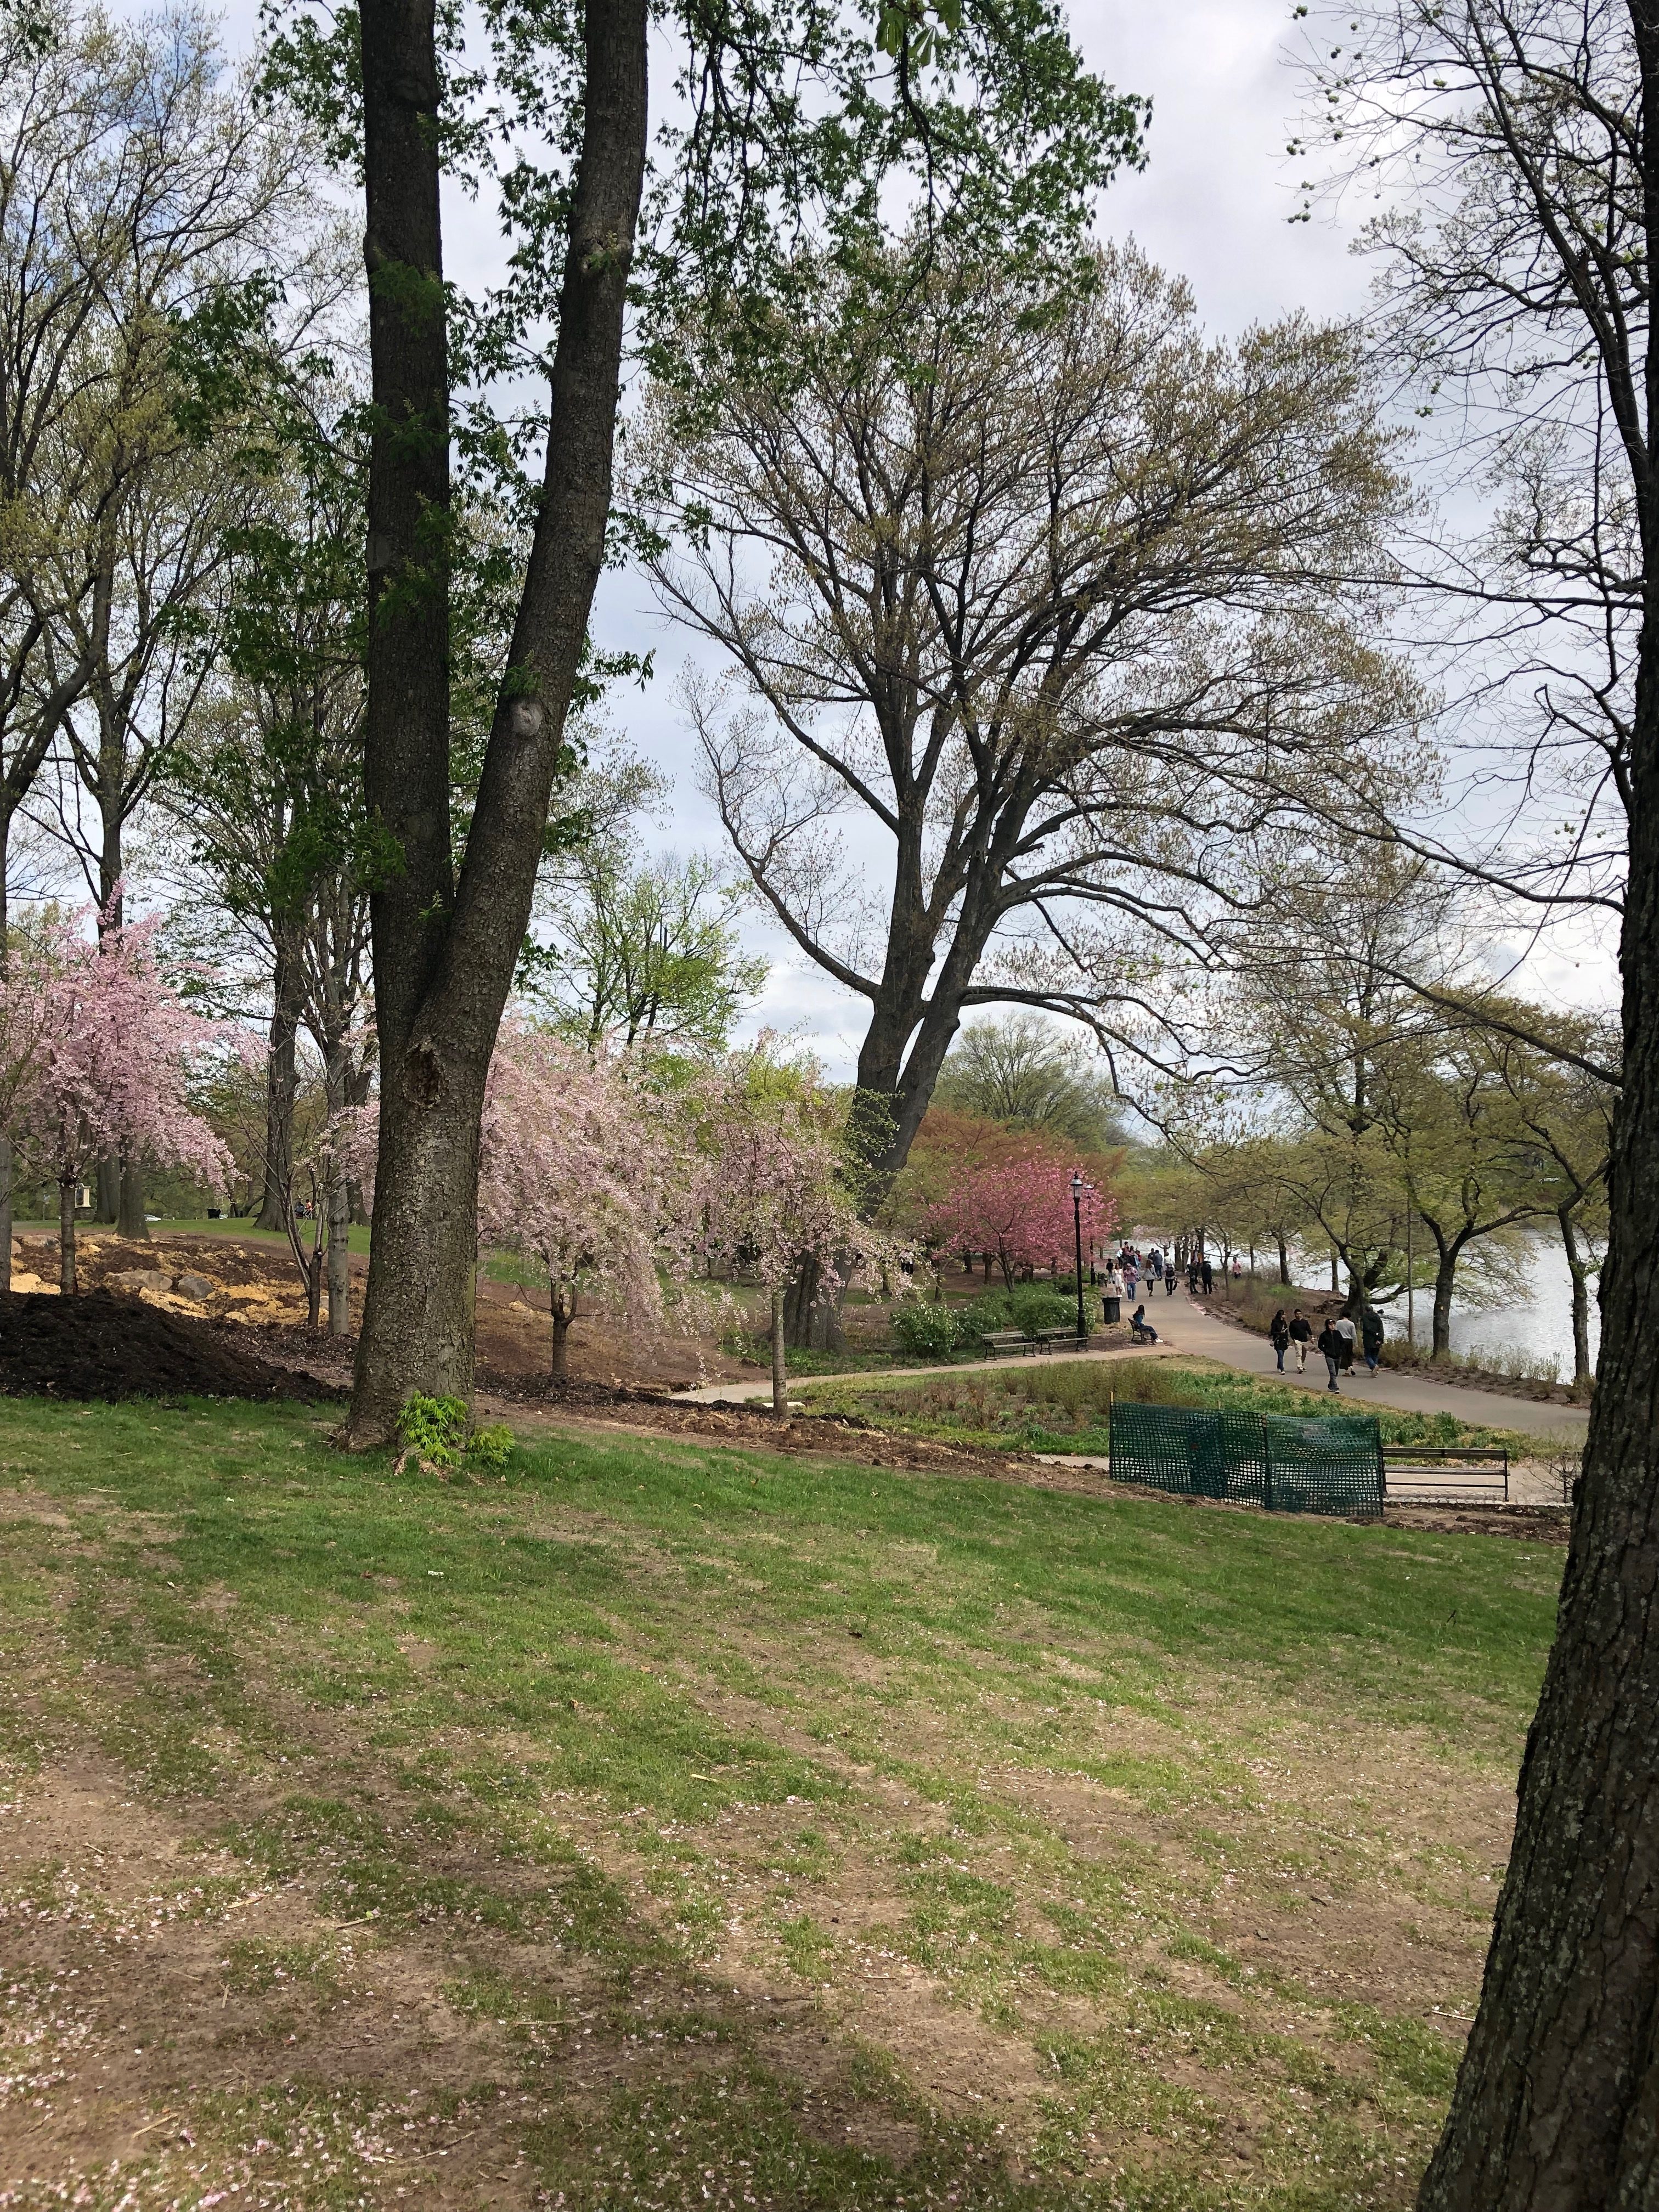 Places To See Cherry Blossoms Near Jersey City Nj